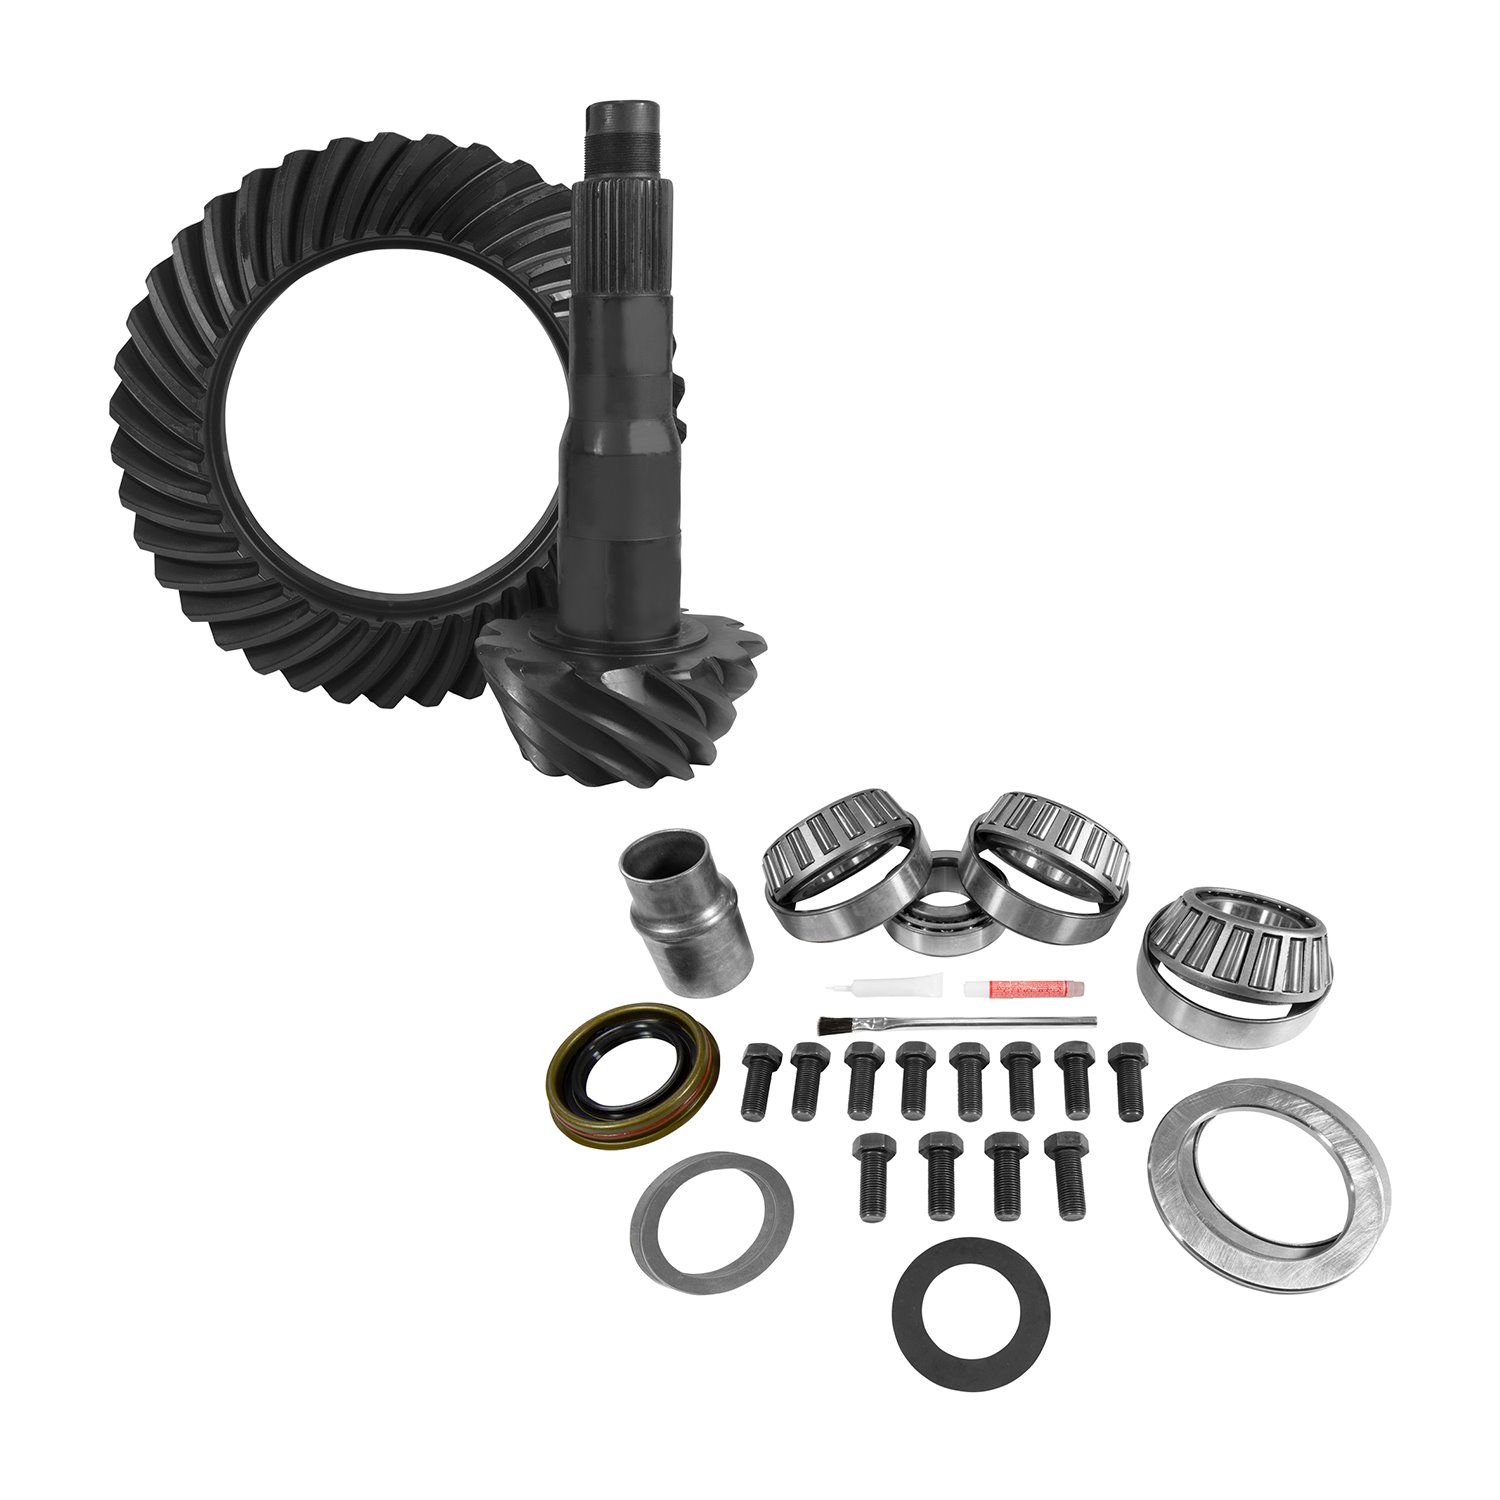 USA Standard 10860 10.5 in. Ford 3.73 Rear Ring & Pinion And Install Kit